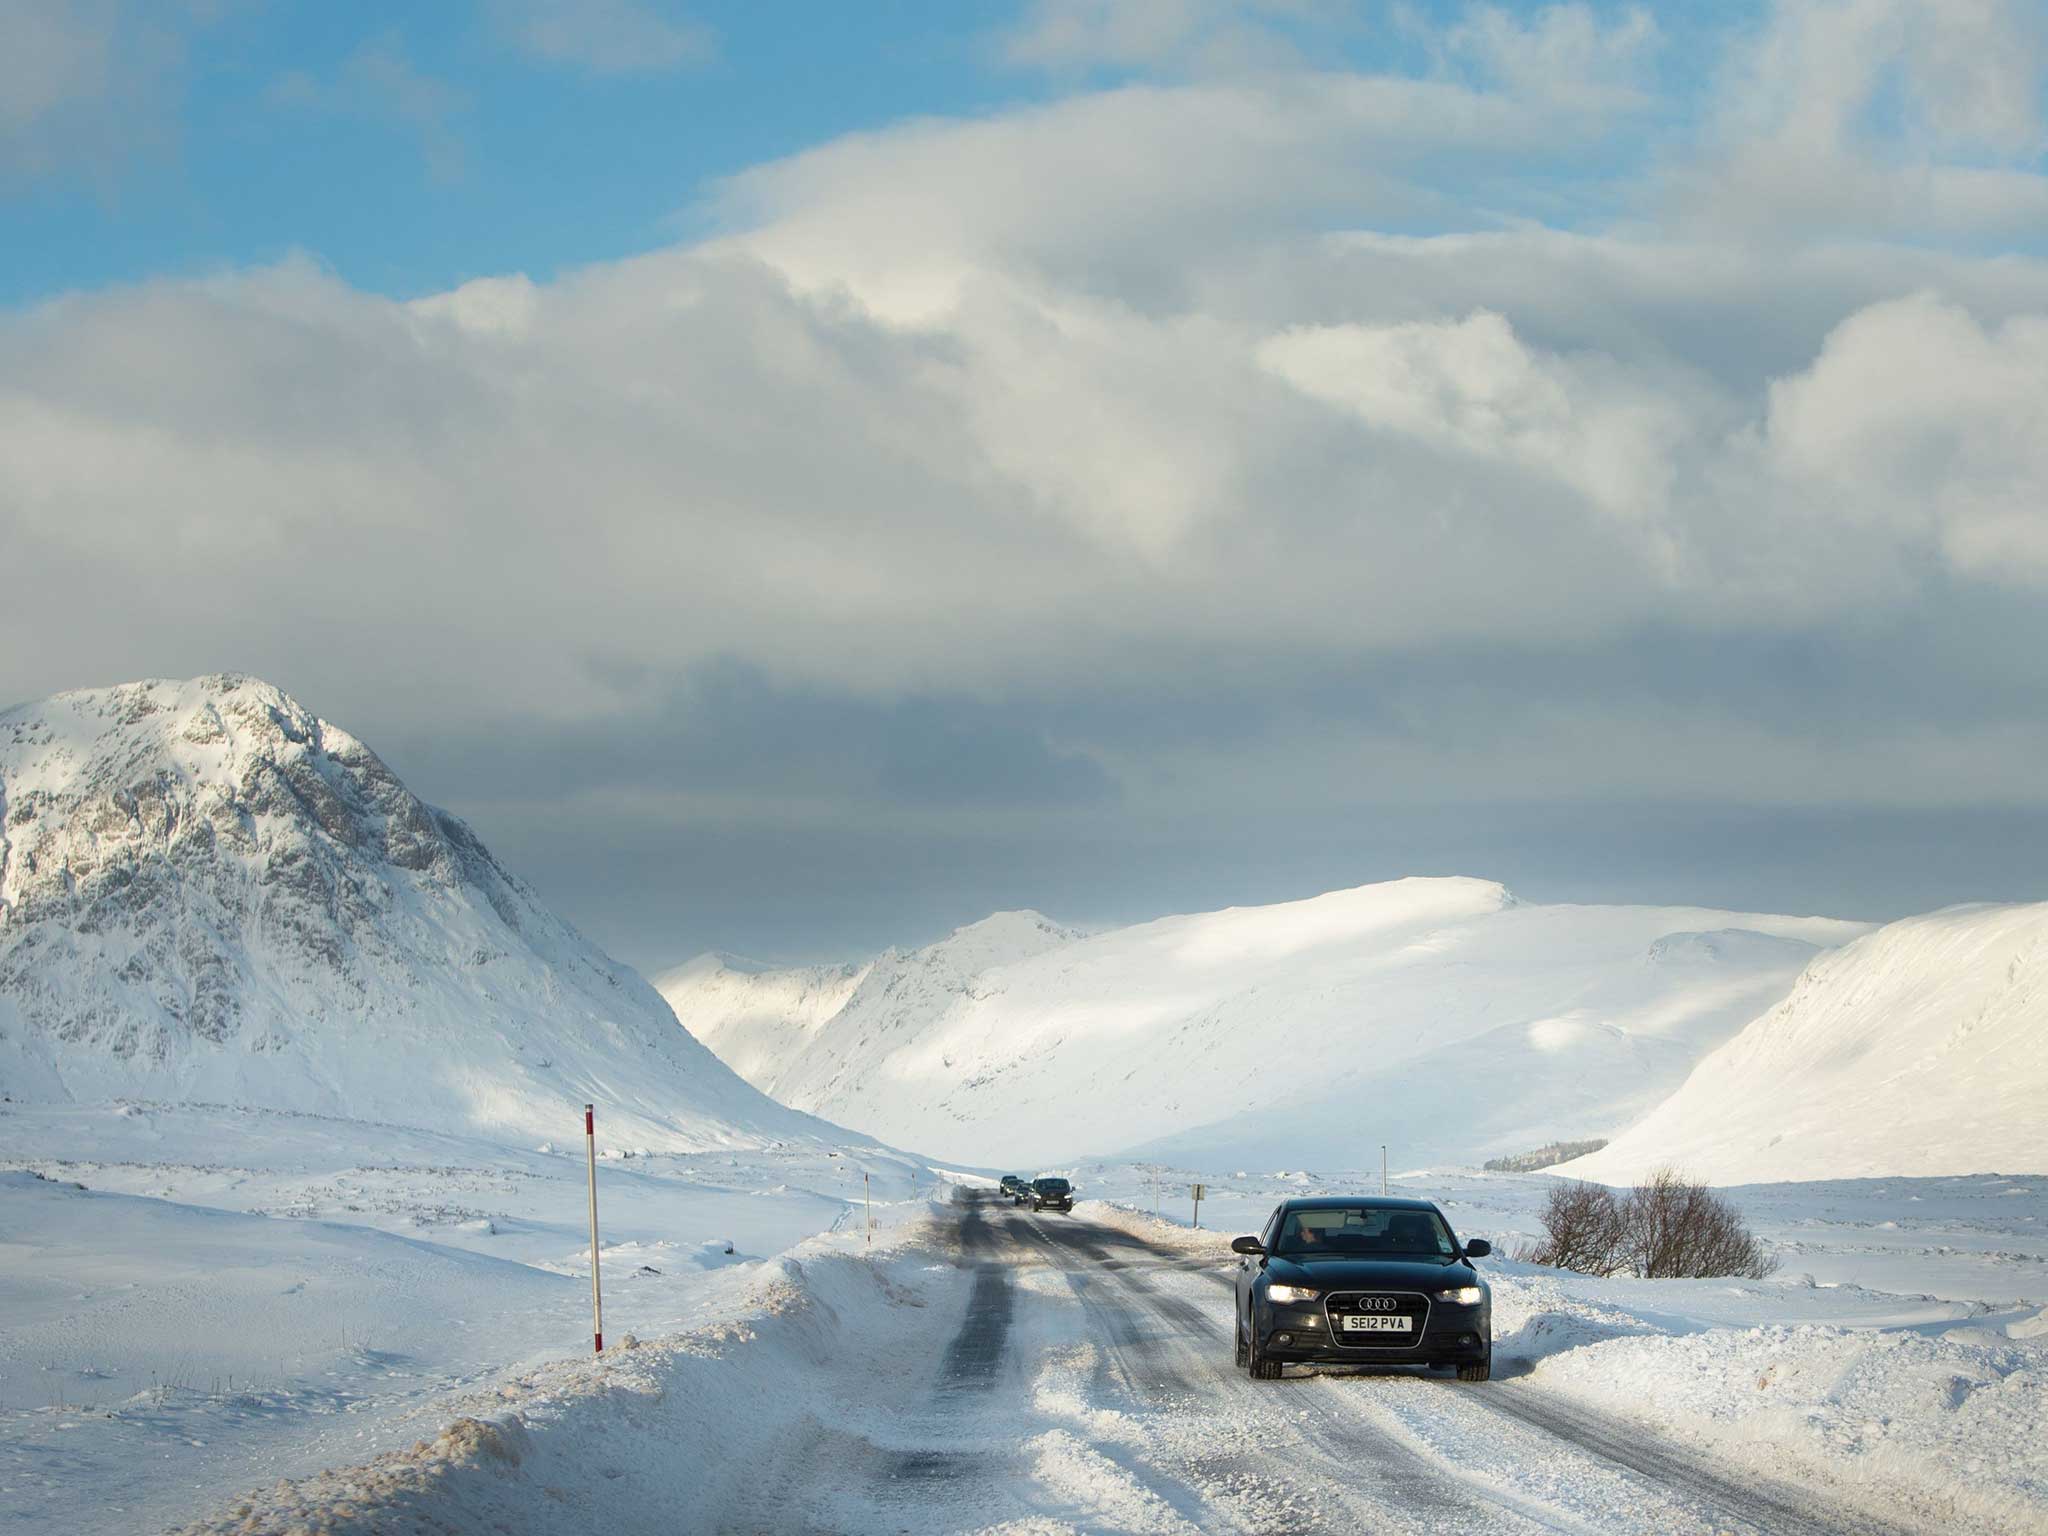 Cars make their way slowly through the treacherous conditions in the highlands